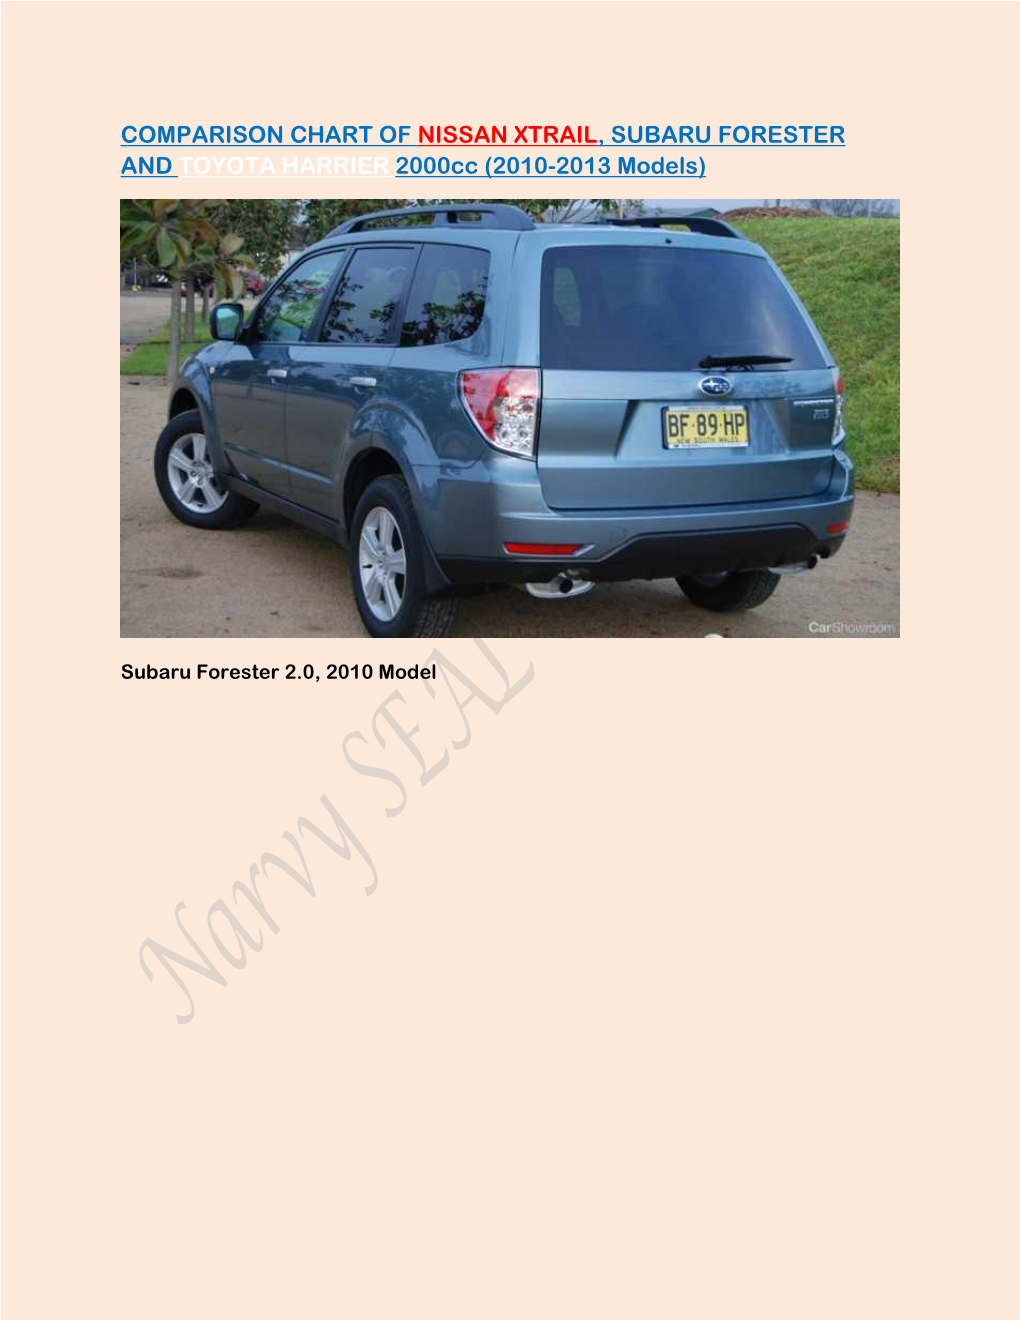 COMPARISON CHART of NISSAN XTRAIL, SUBARU FORESTER and TOYOTA HARRIER 2000Cc (2010-2013 Models)